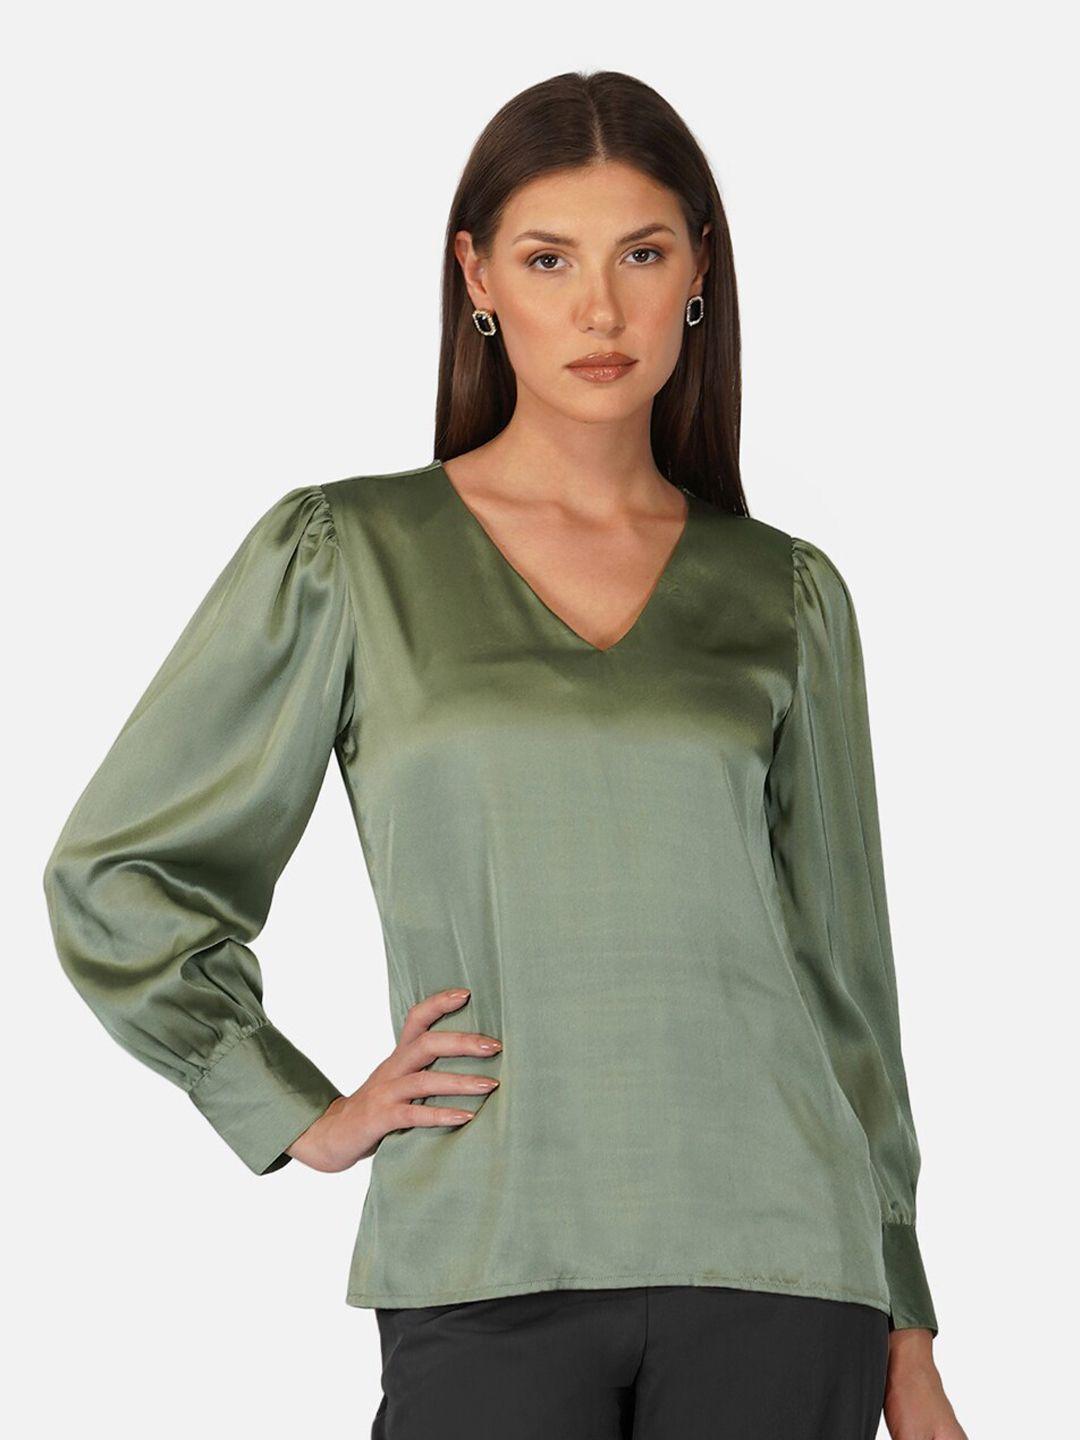 purys-v-neck-cuff-sleeves-satin-top